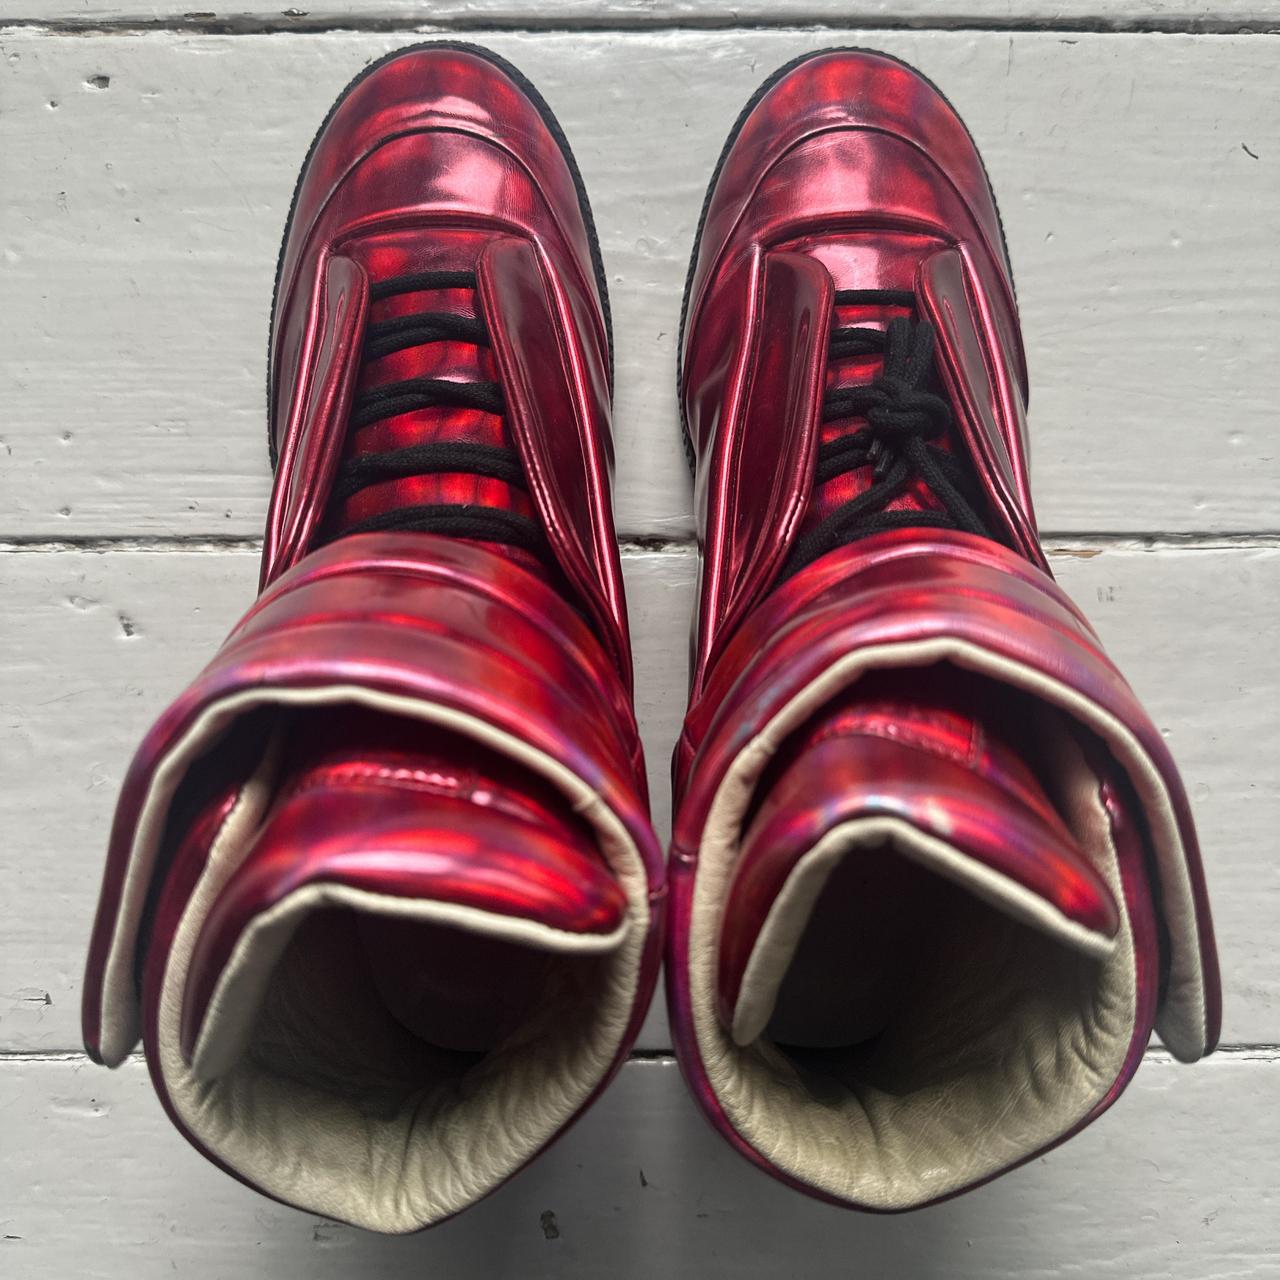 Maison Margiela Reflective Red Future Space Boots